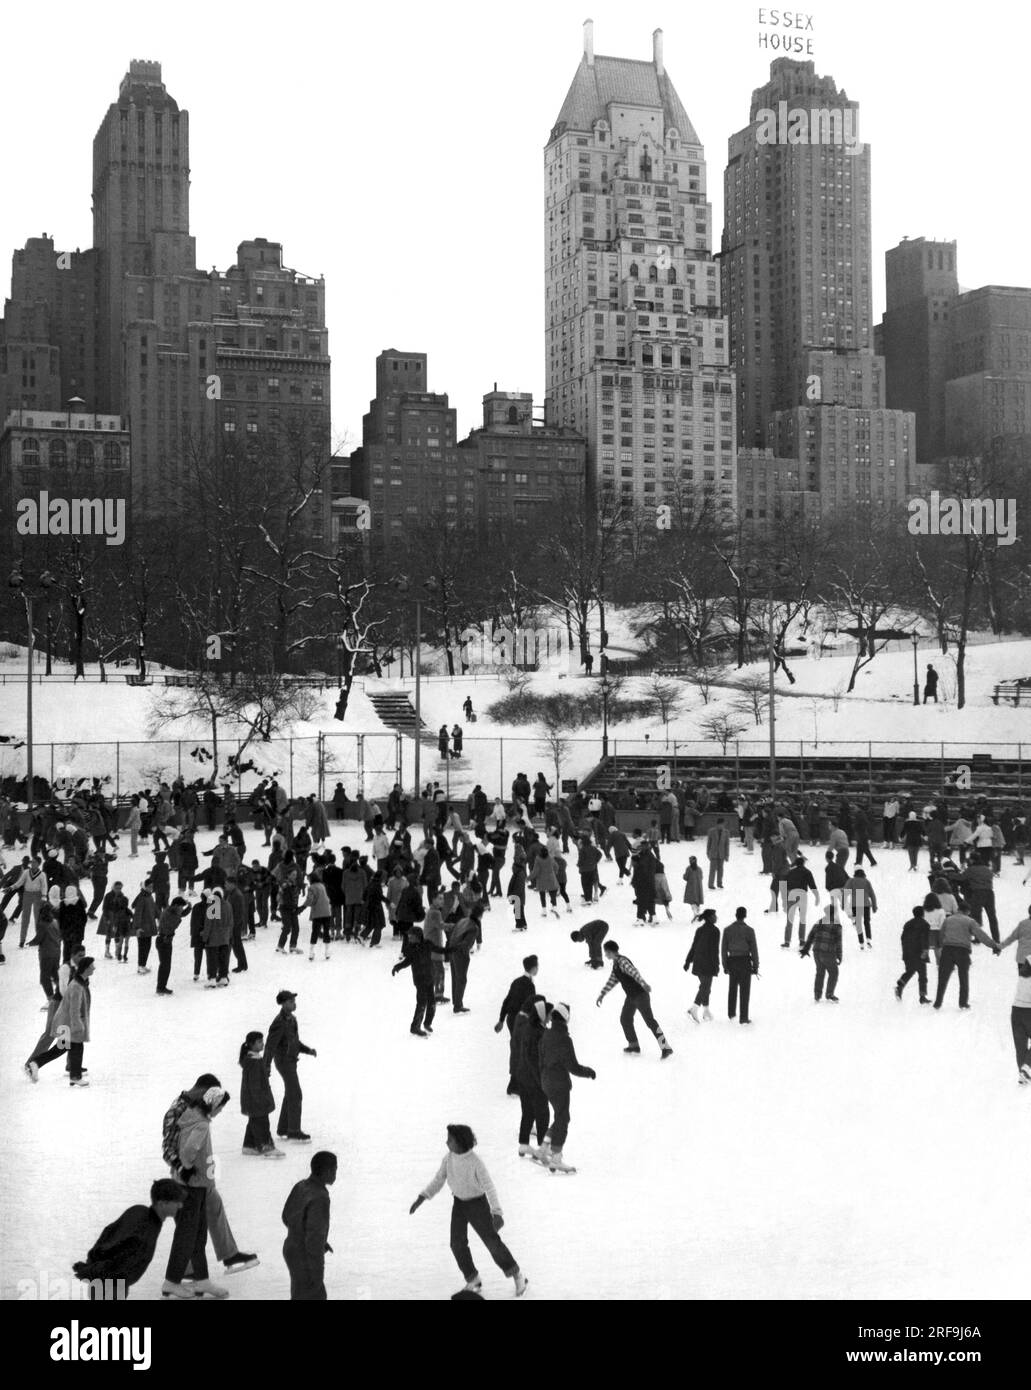 New York, New York:   c. 1952 Ice skating in Central Park at the 59th Street rink in New York City with the Essex House in the background. Stock Photo